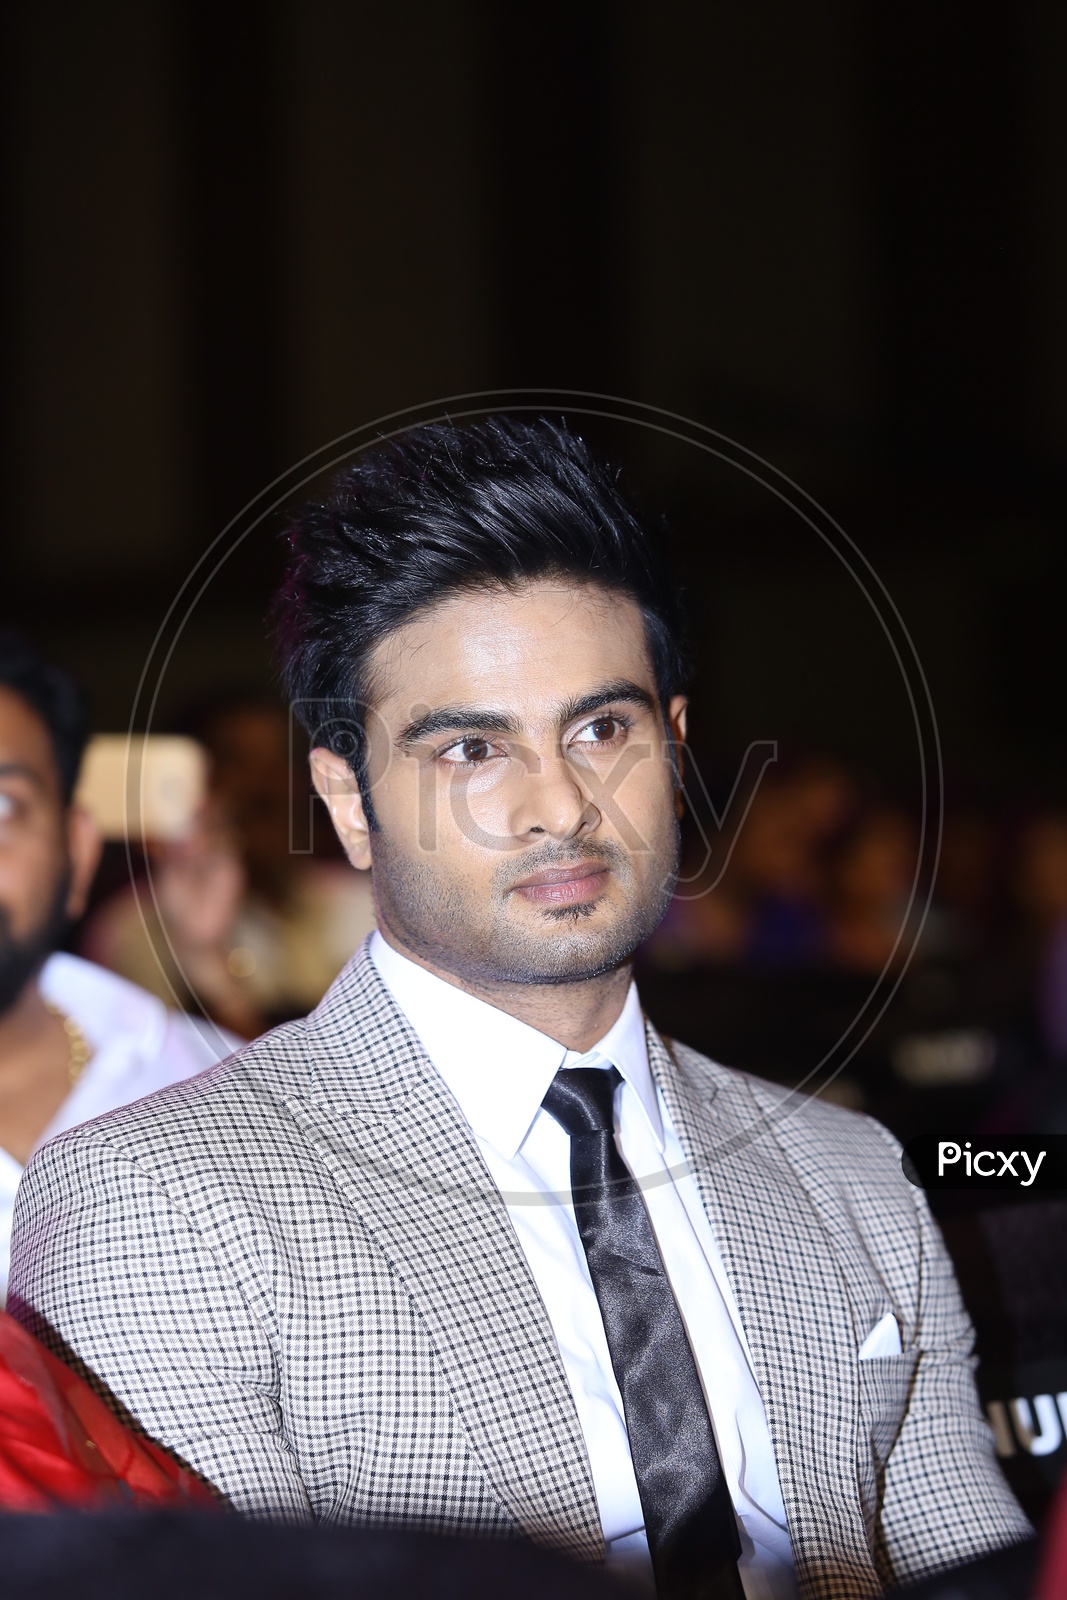 Sudheer Babu For a biopic important to understand the life of a person